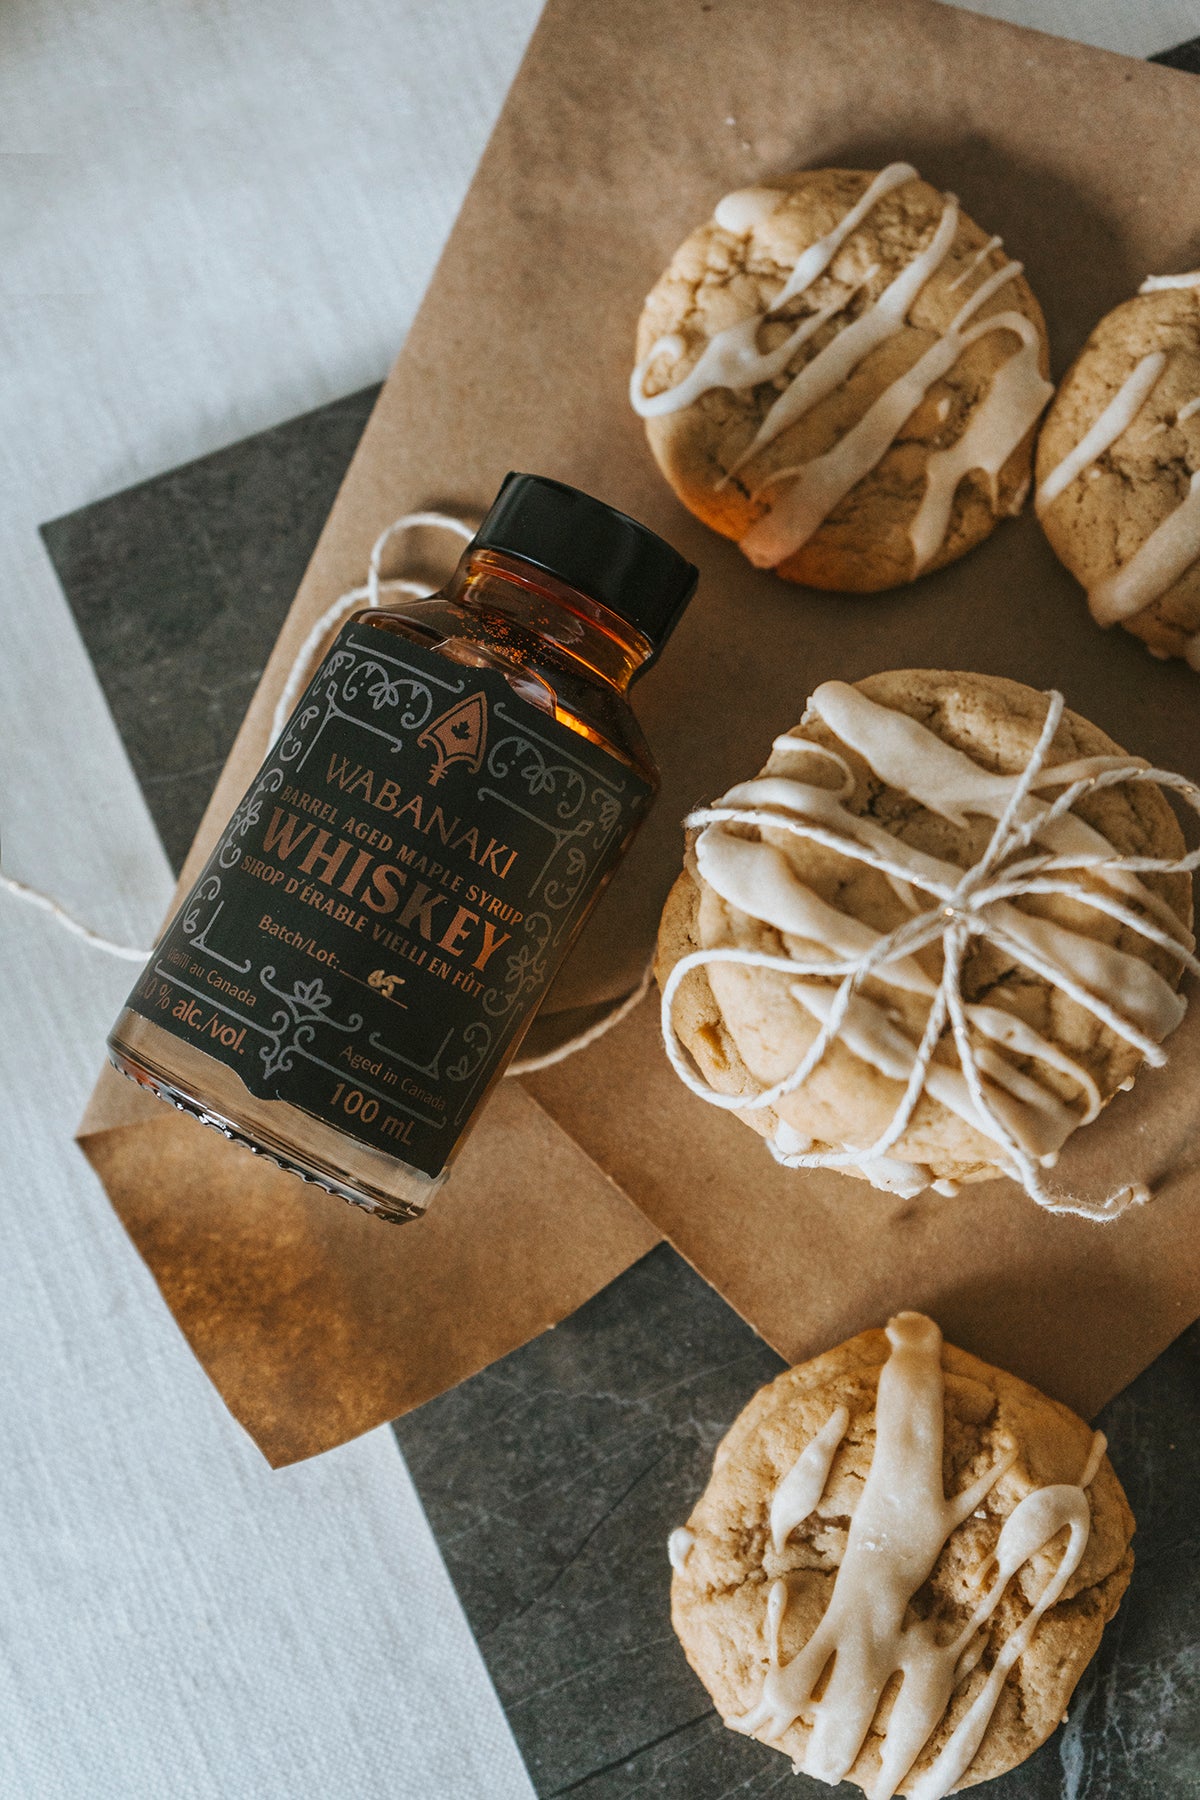 Wabanaki Maple Syrup with Maple Brown sugar cookie